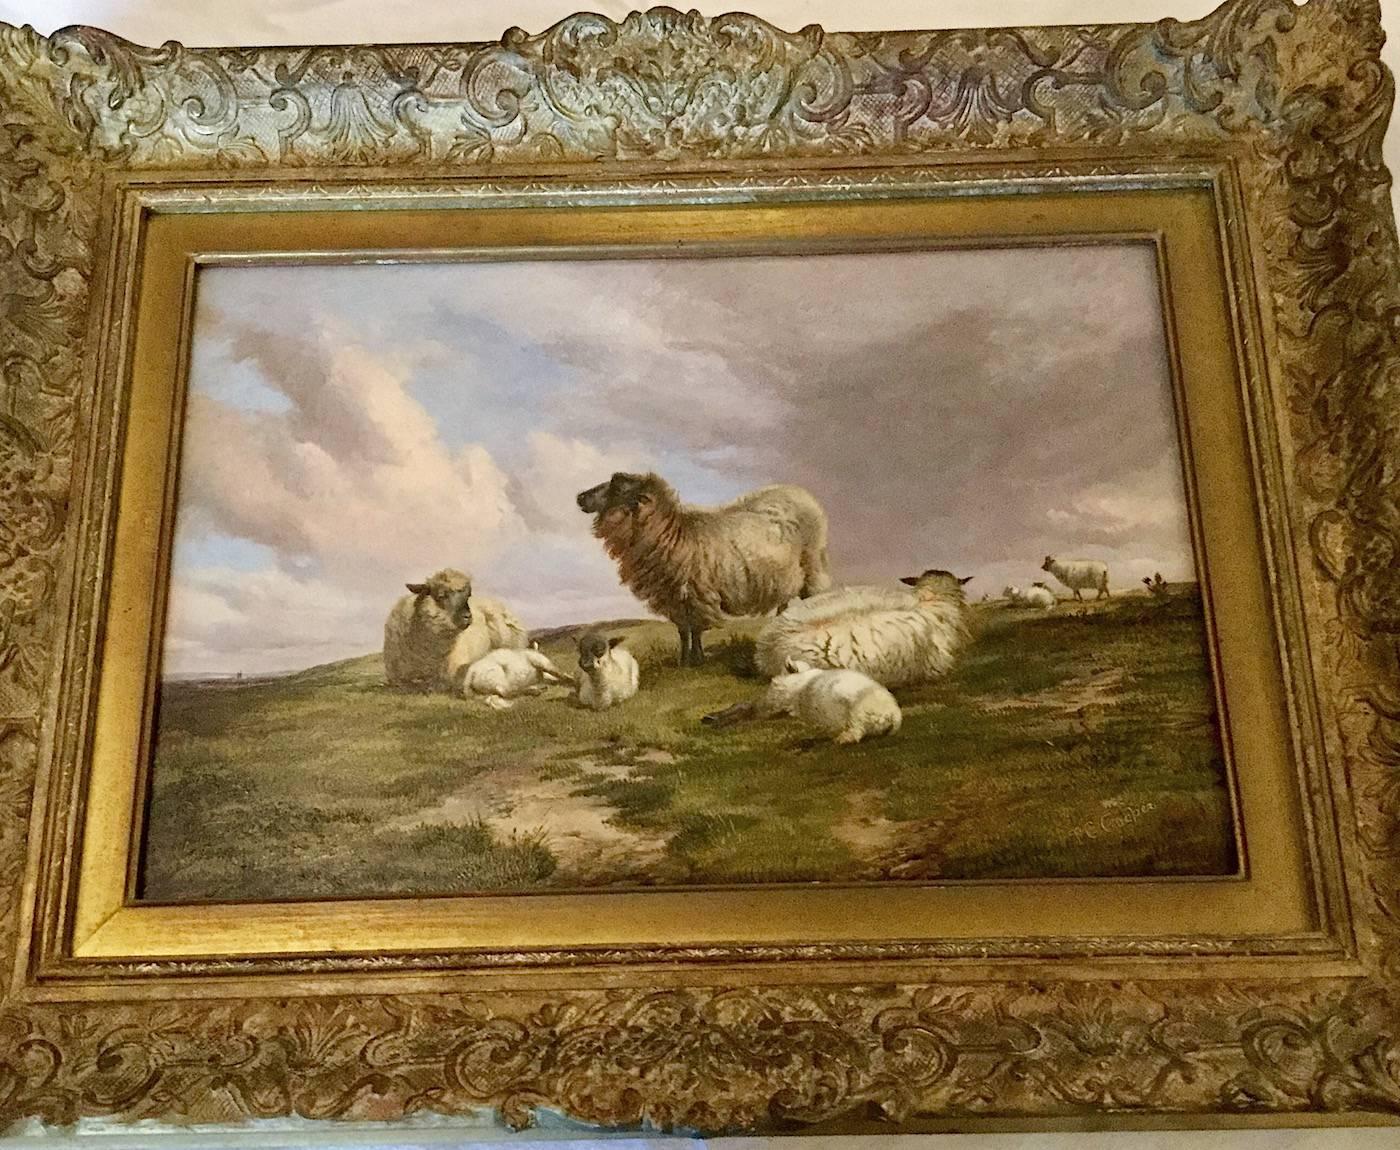 Sheep in a Landscape An English Scene Victorian 19th Century by T G Cooper  2